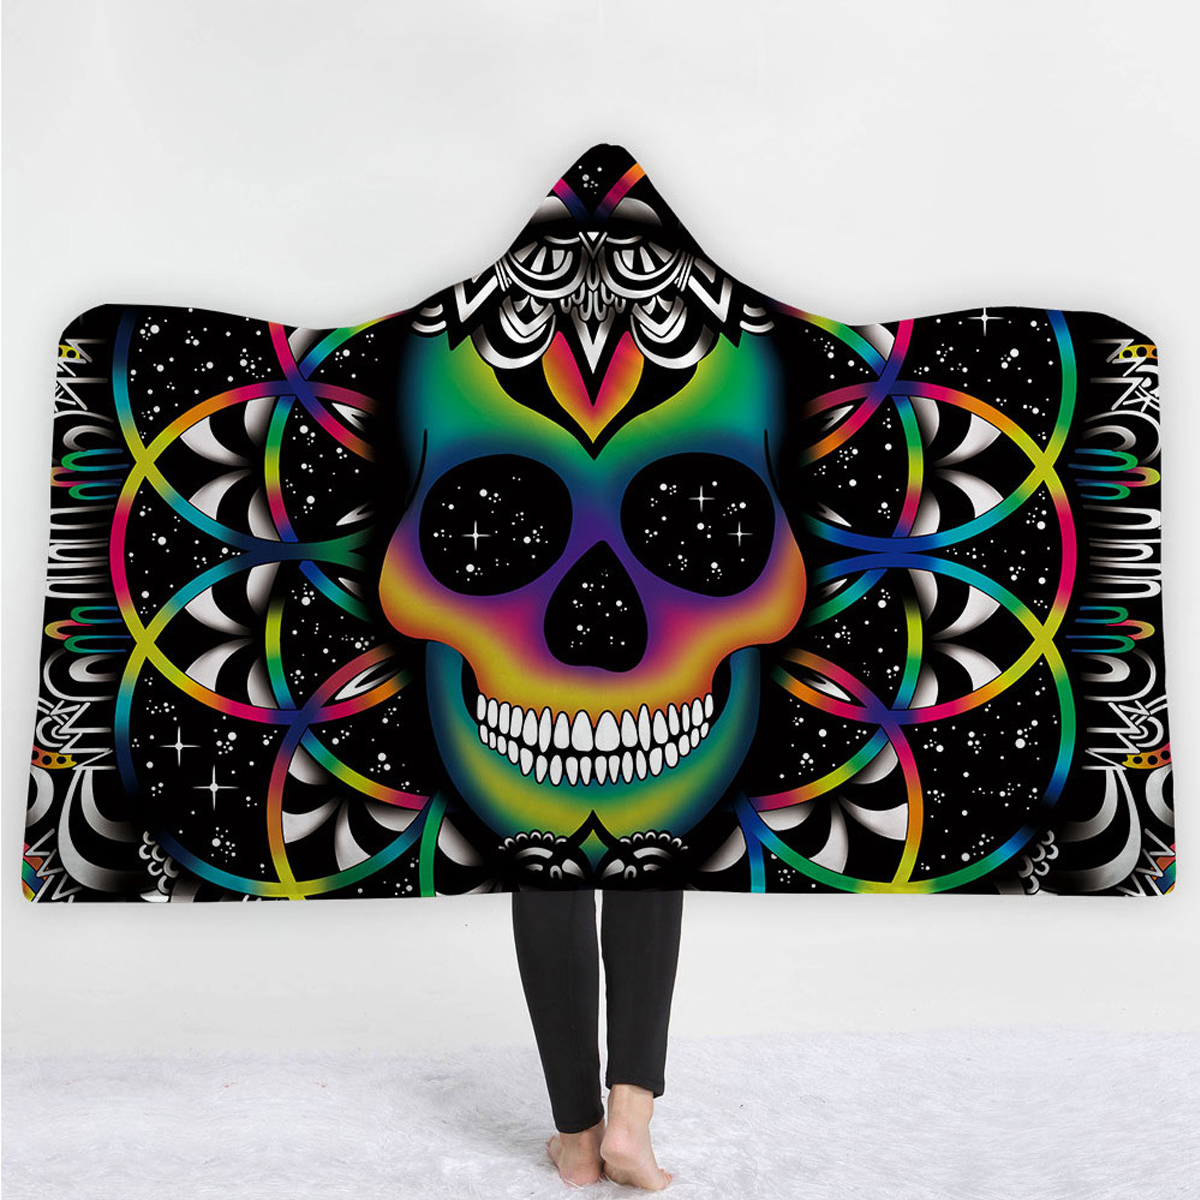 130x150cm-3D-Digital-Printing-The-Skeleton-Wearable-Hooded-Blanket-Thickened-Double-Plush-Blankets-1353393